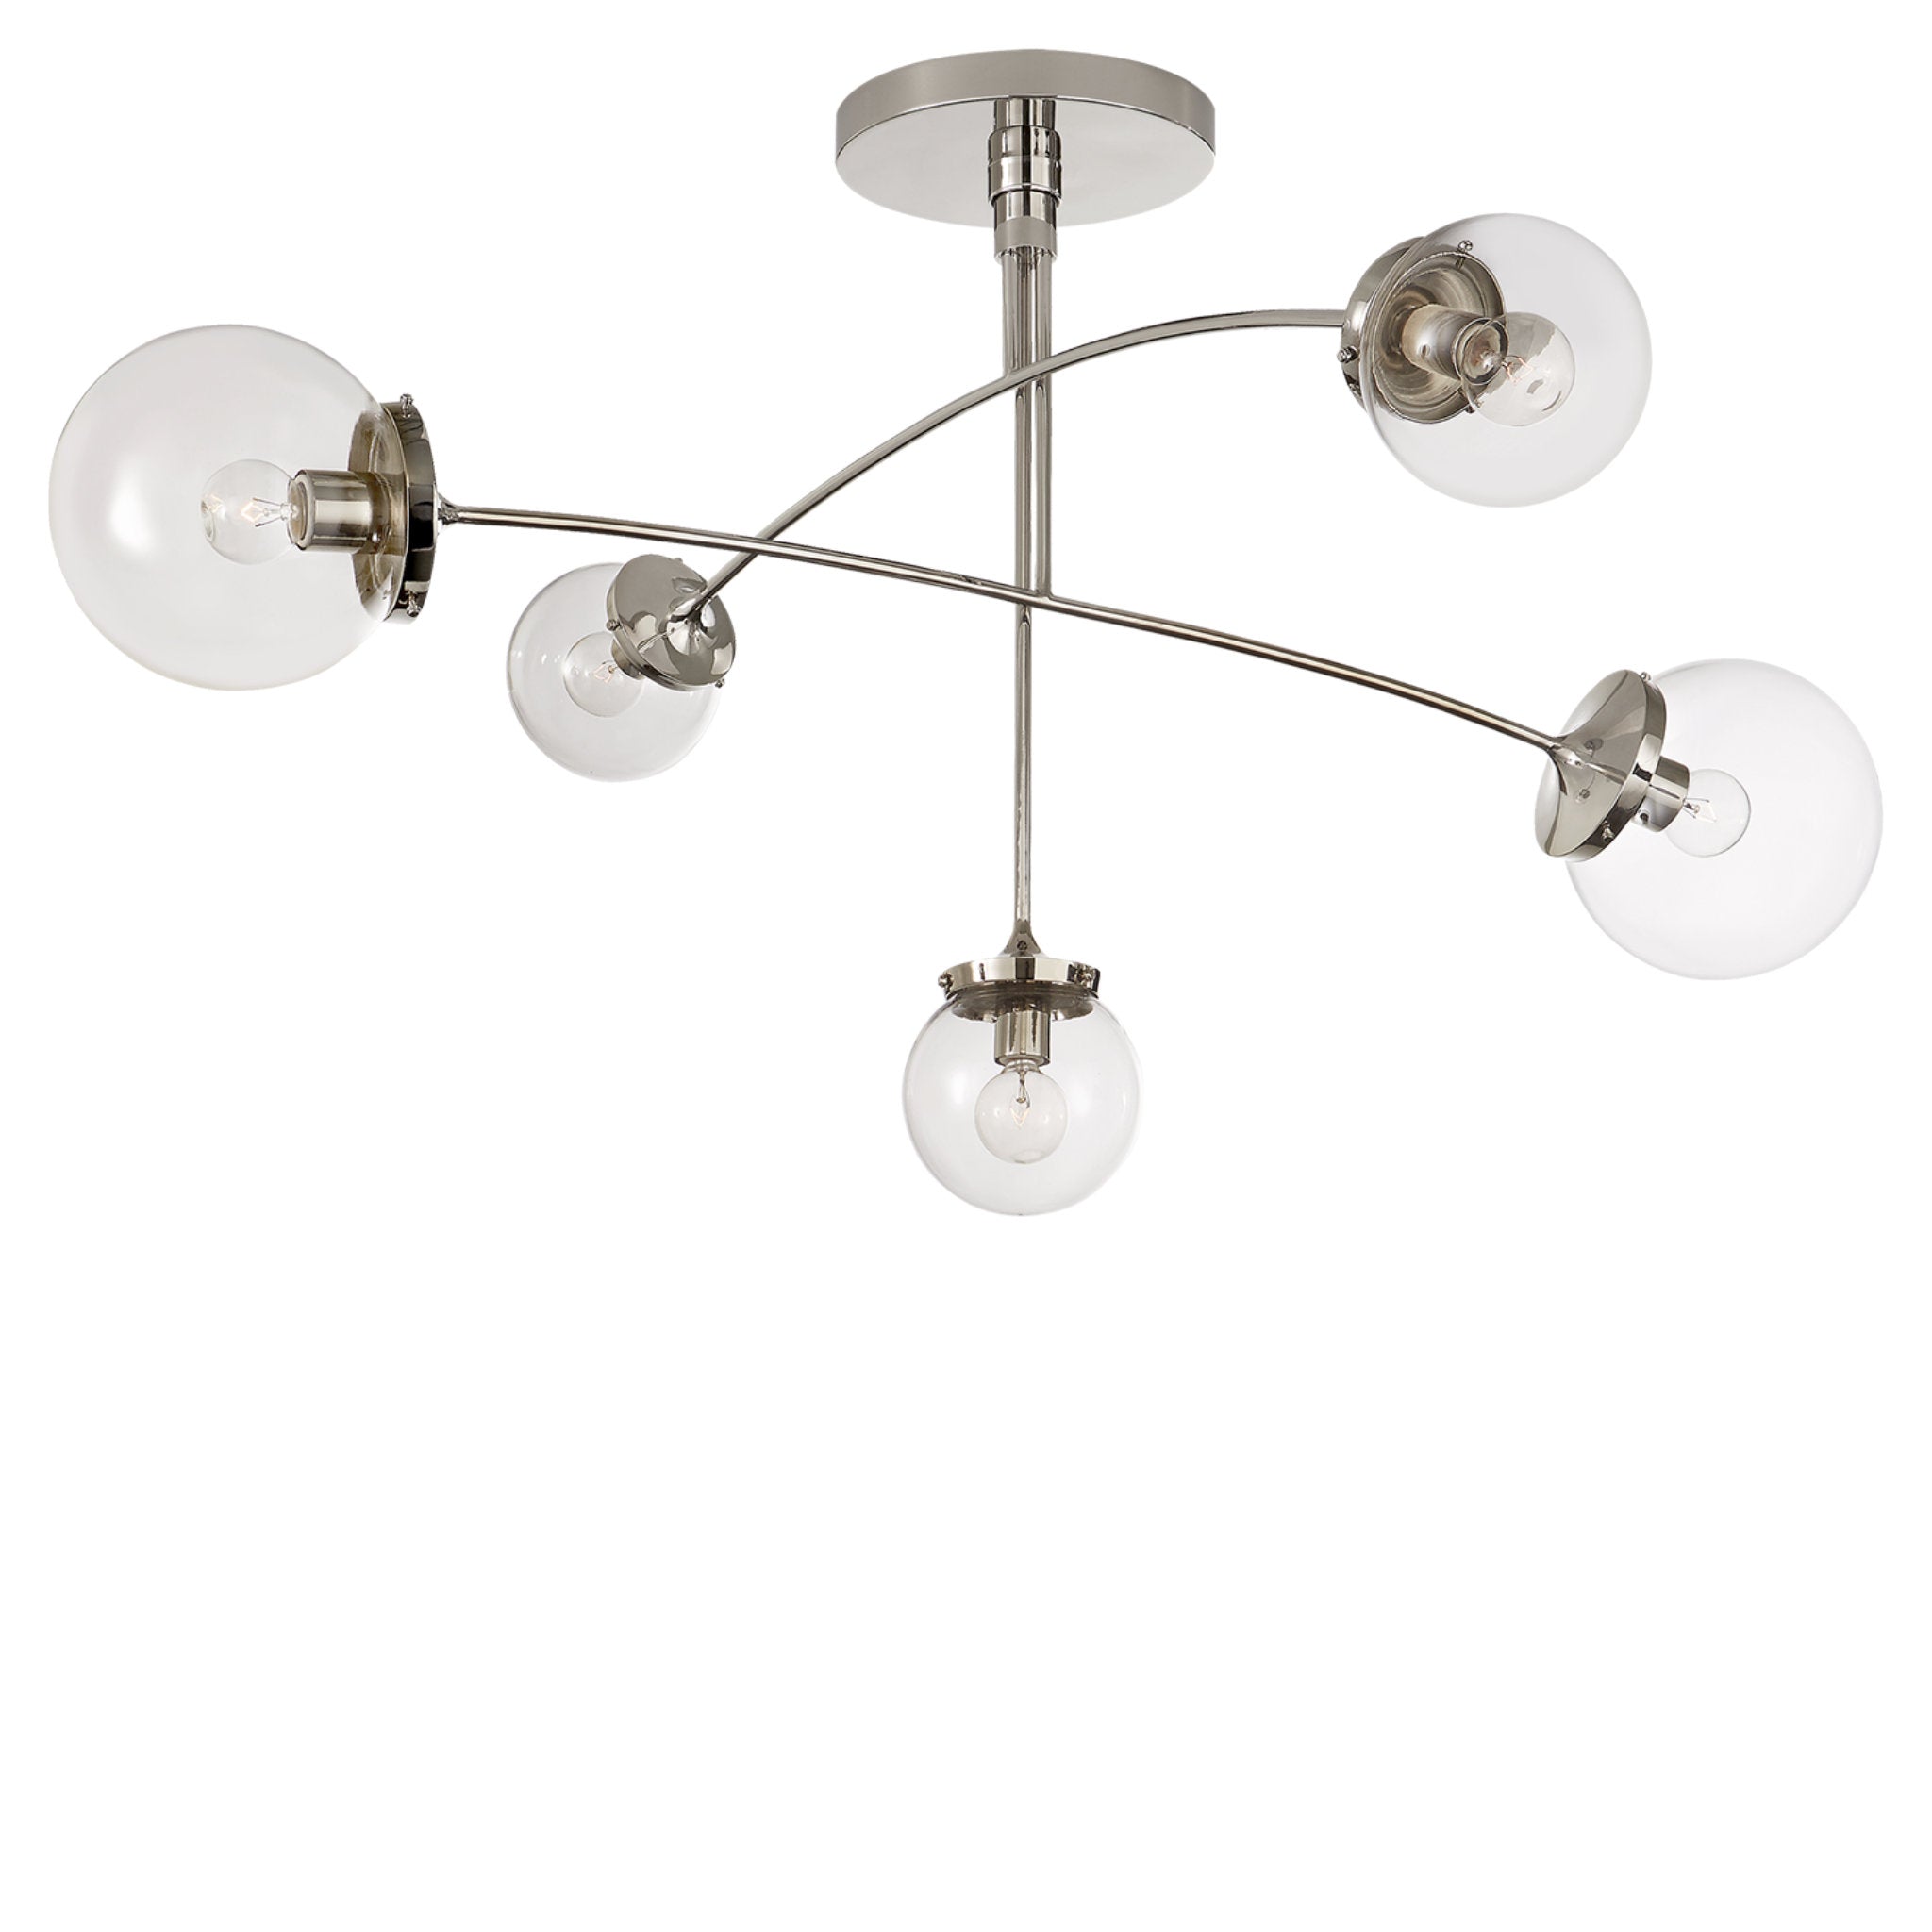 kate spade new york Prescott Medium Mobile Chandelier in Polished Nickel with Clear Glass